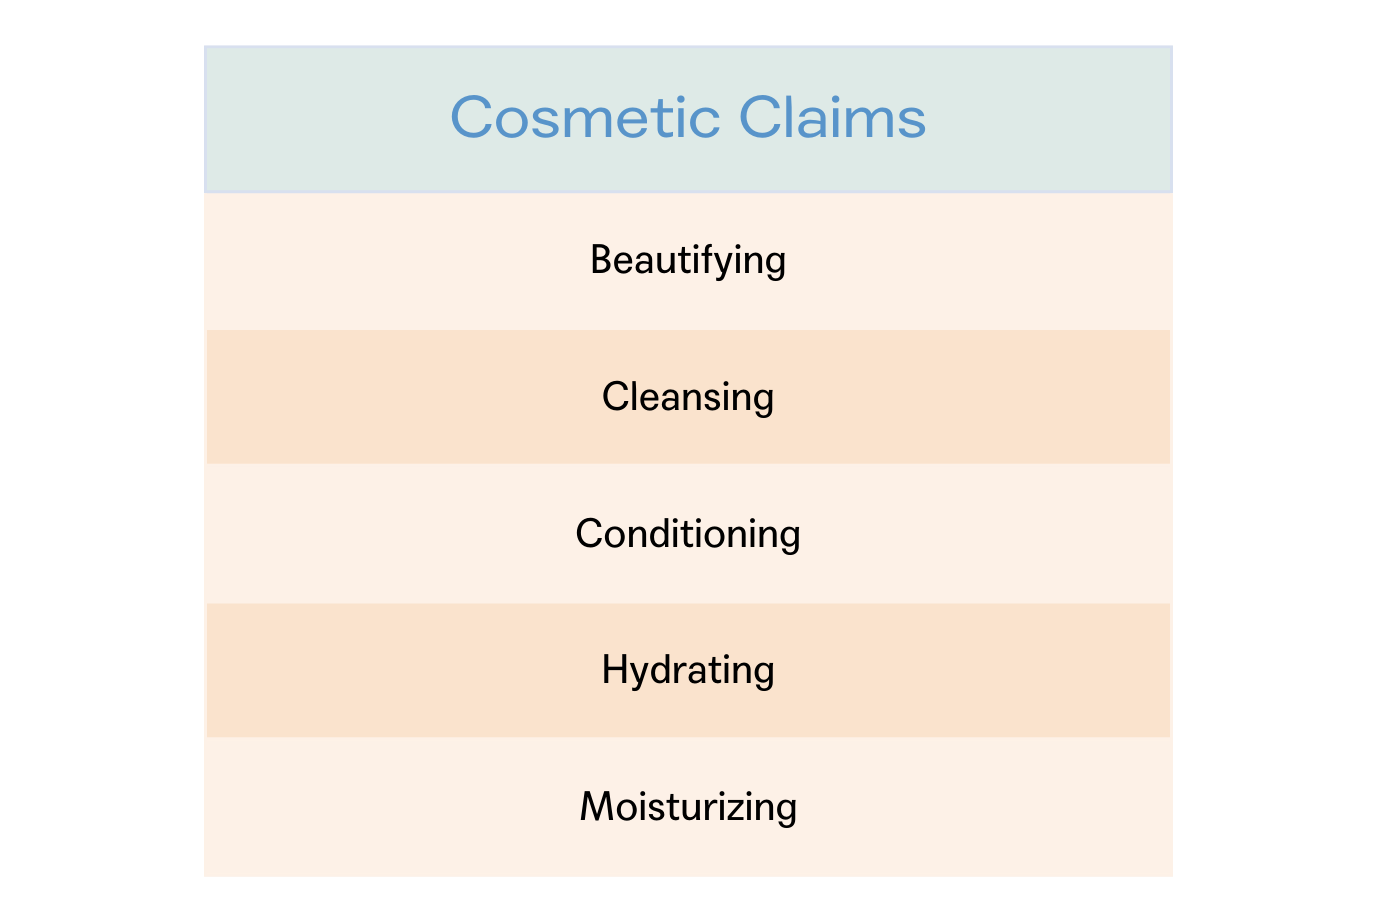 Cosmetic Claims